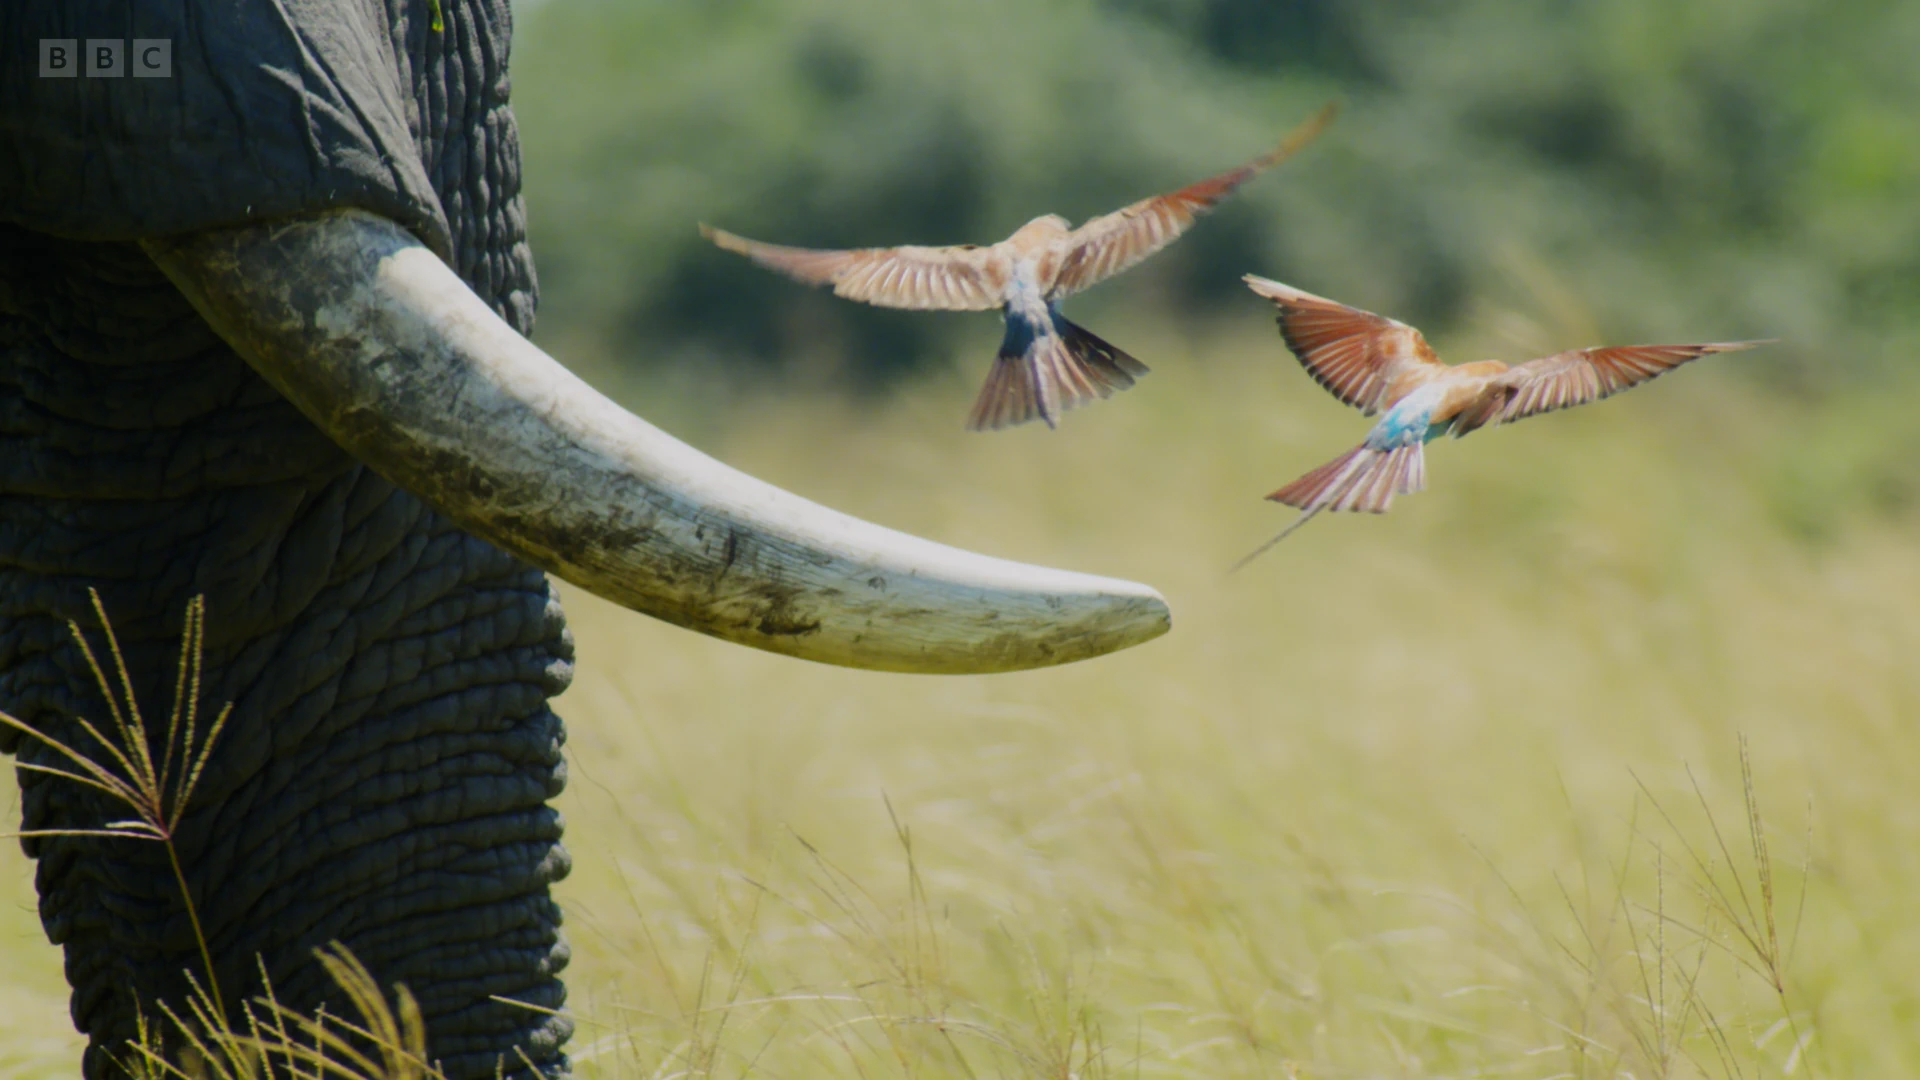 Southern carmine bee-eater (Merops nubicoides) as shown in Planet Earth II - Grasslands